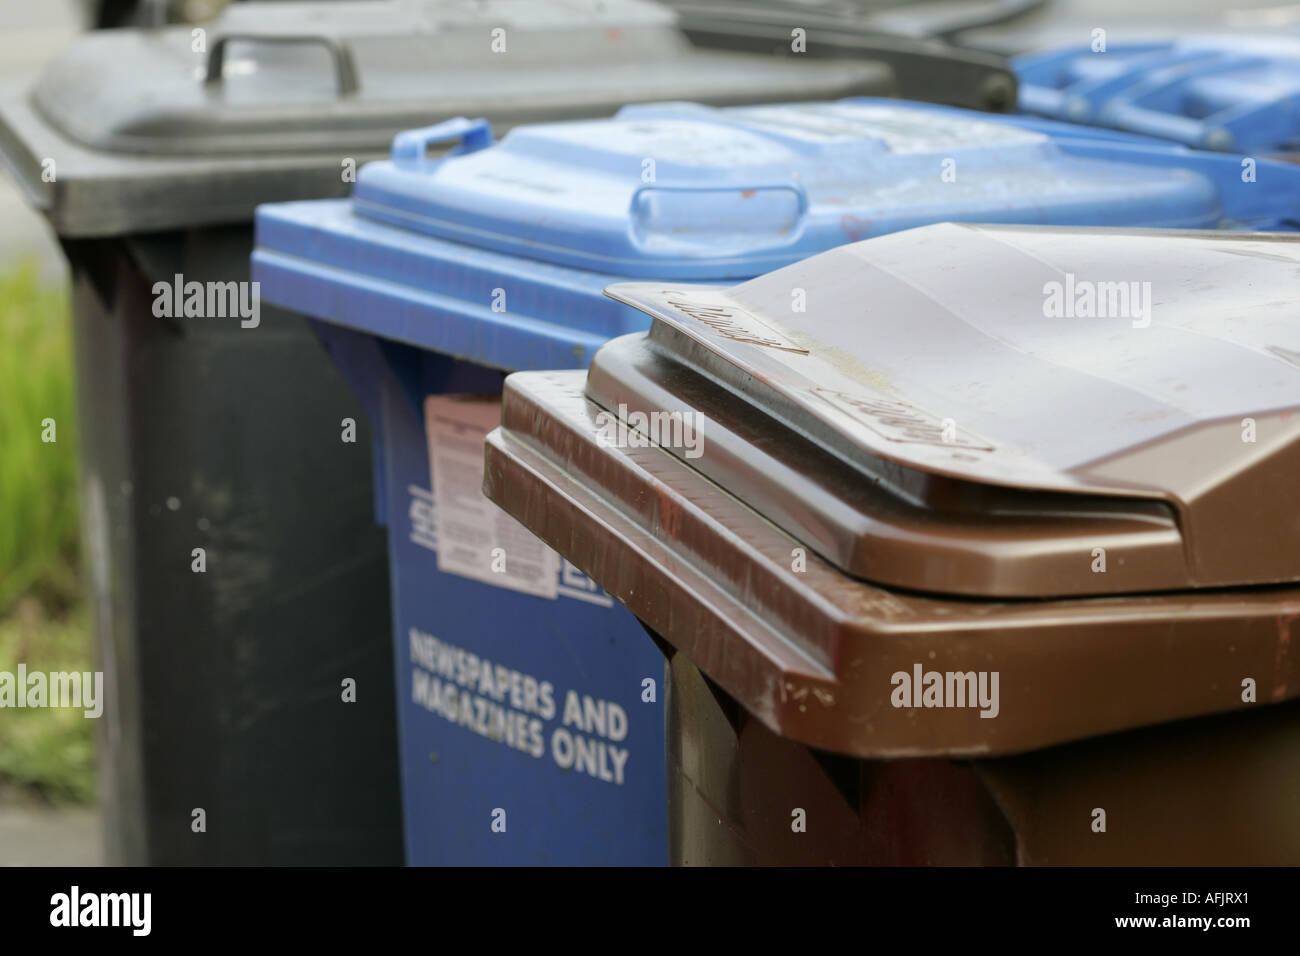 A selection of waste bins including refuse paper recycling blue and garden waste recycling bin brown for a household Stock Photo